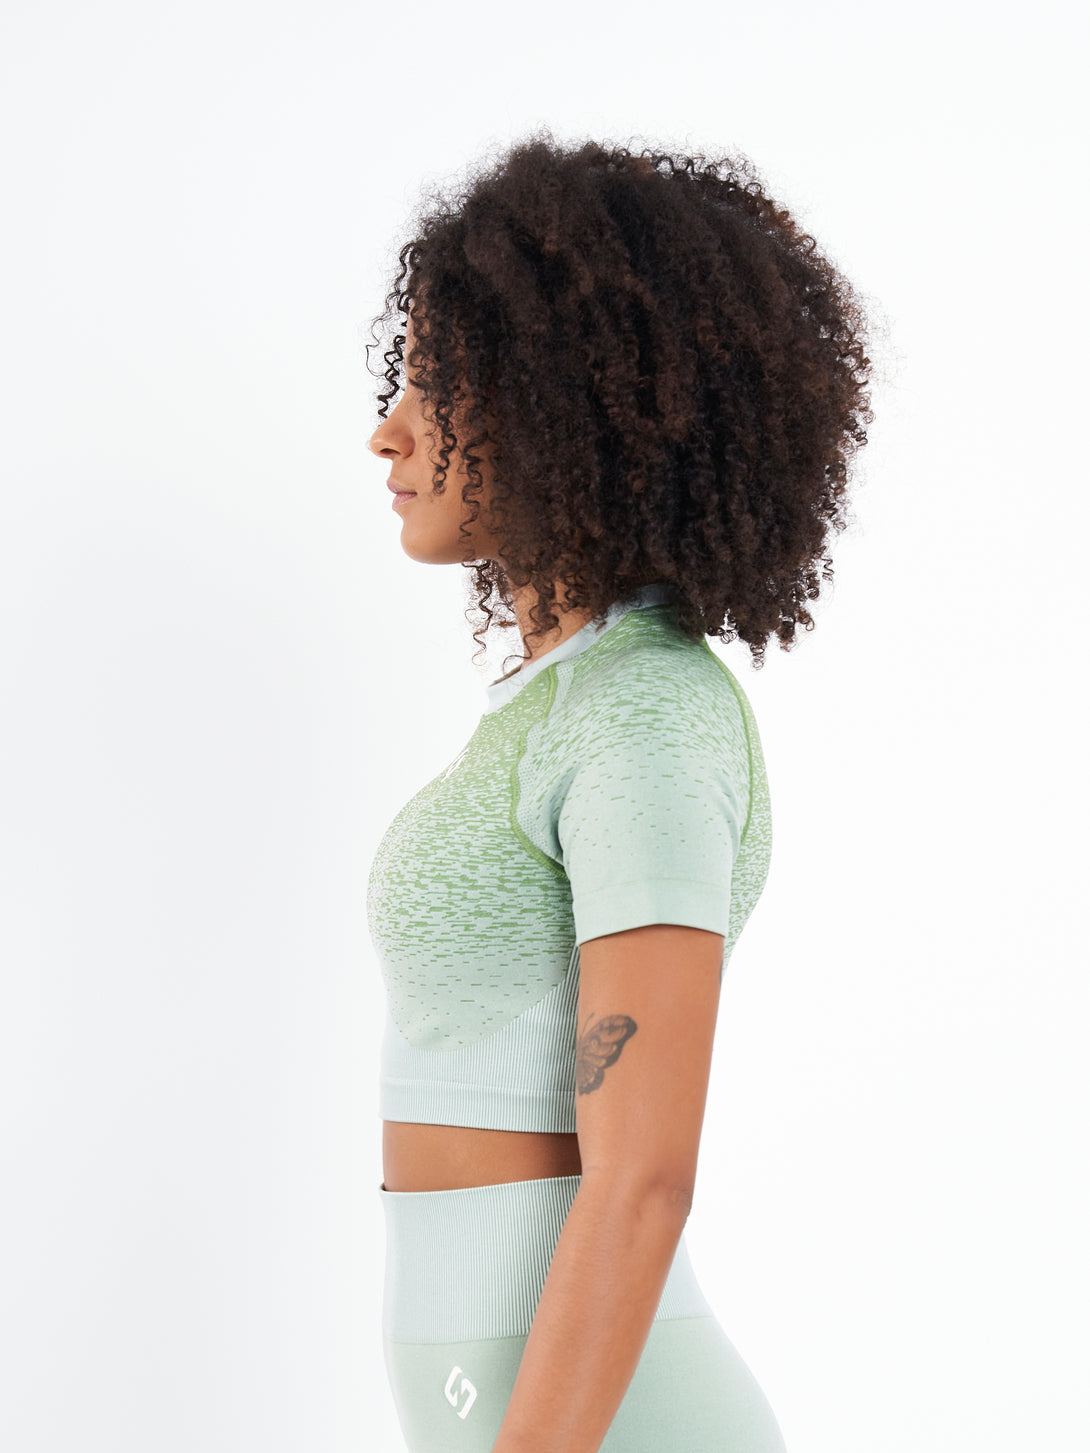 A Woman Wearing Mist Green Color Seamless Crop Top with Ombre Effect. Chic Comfort